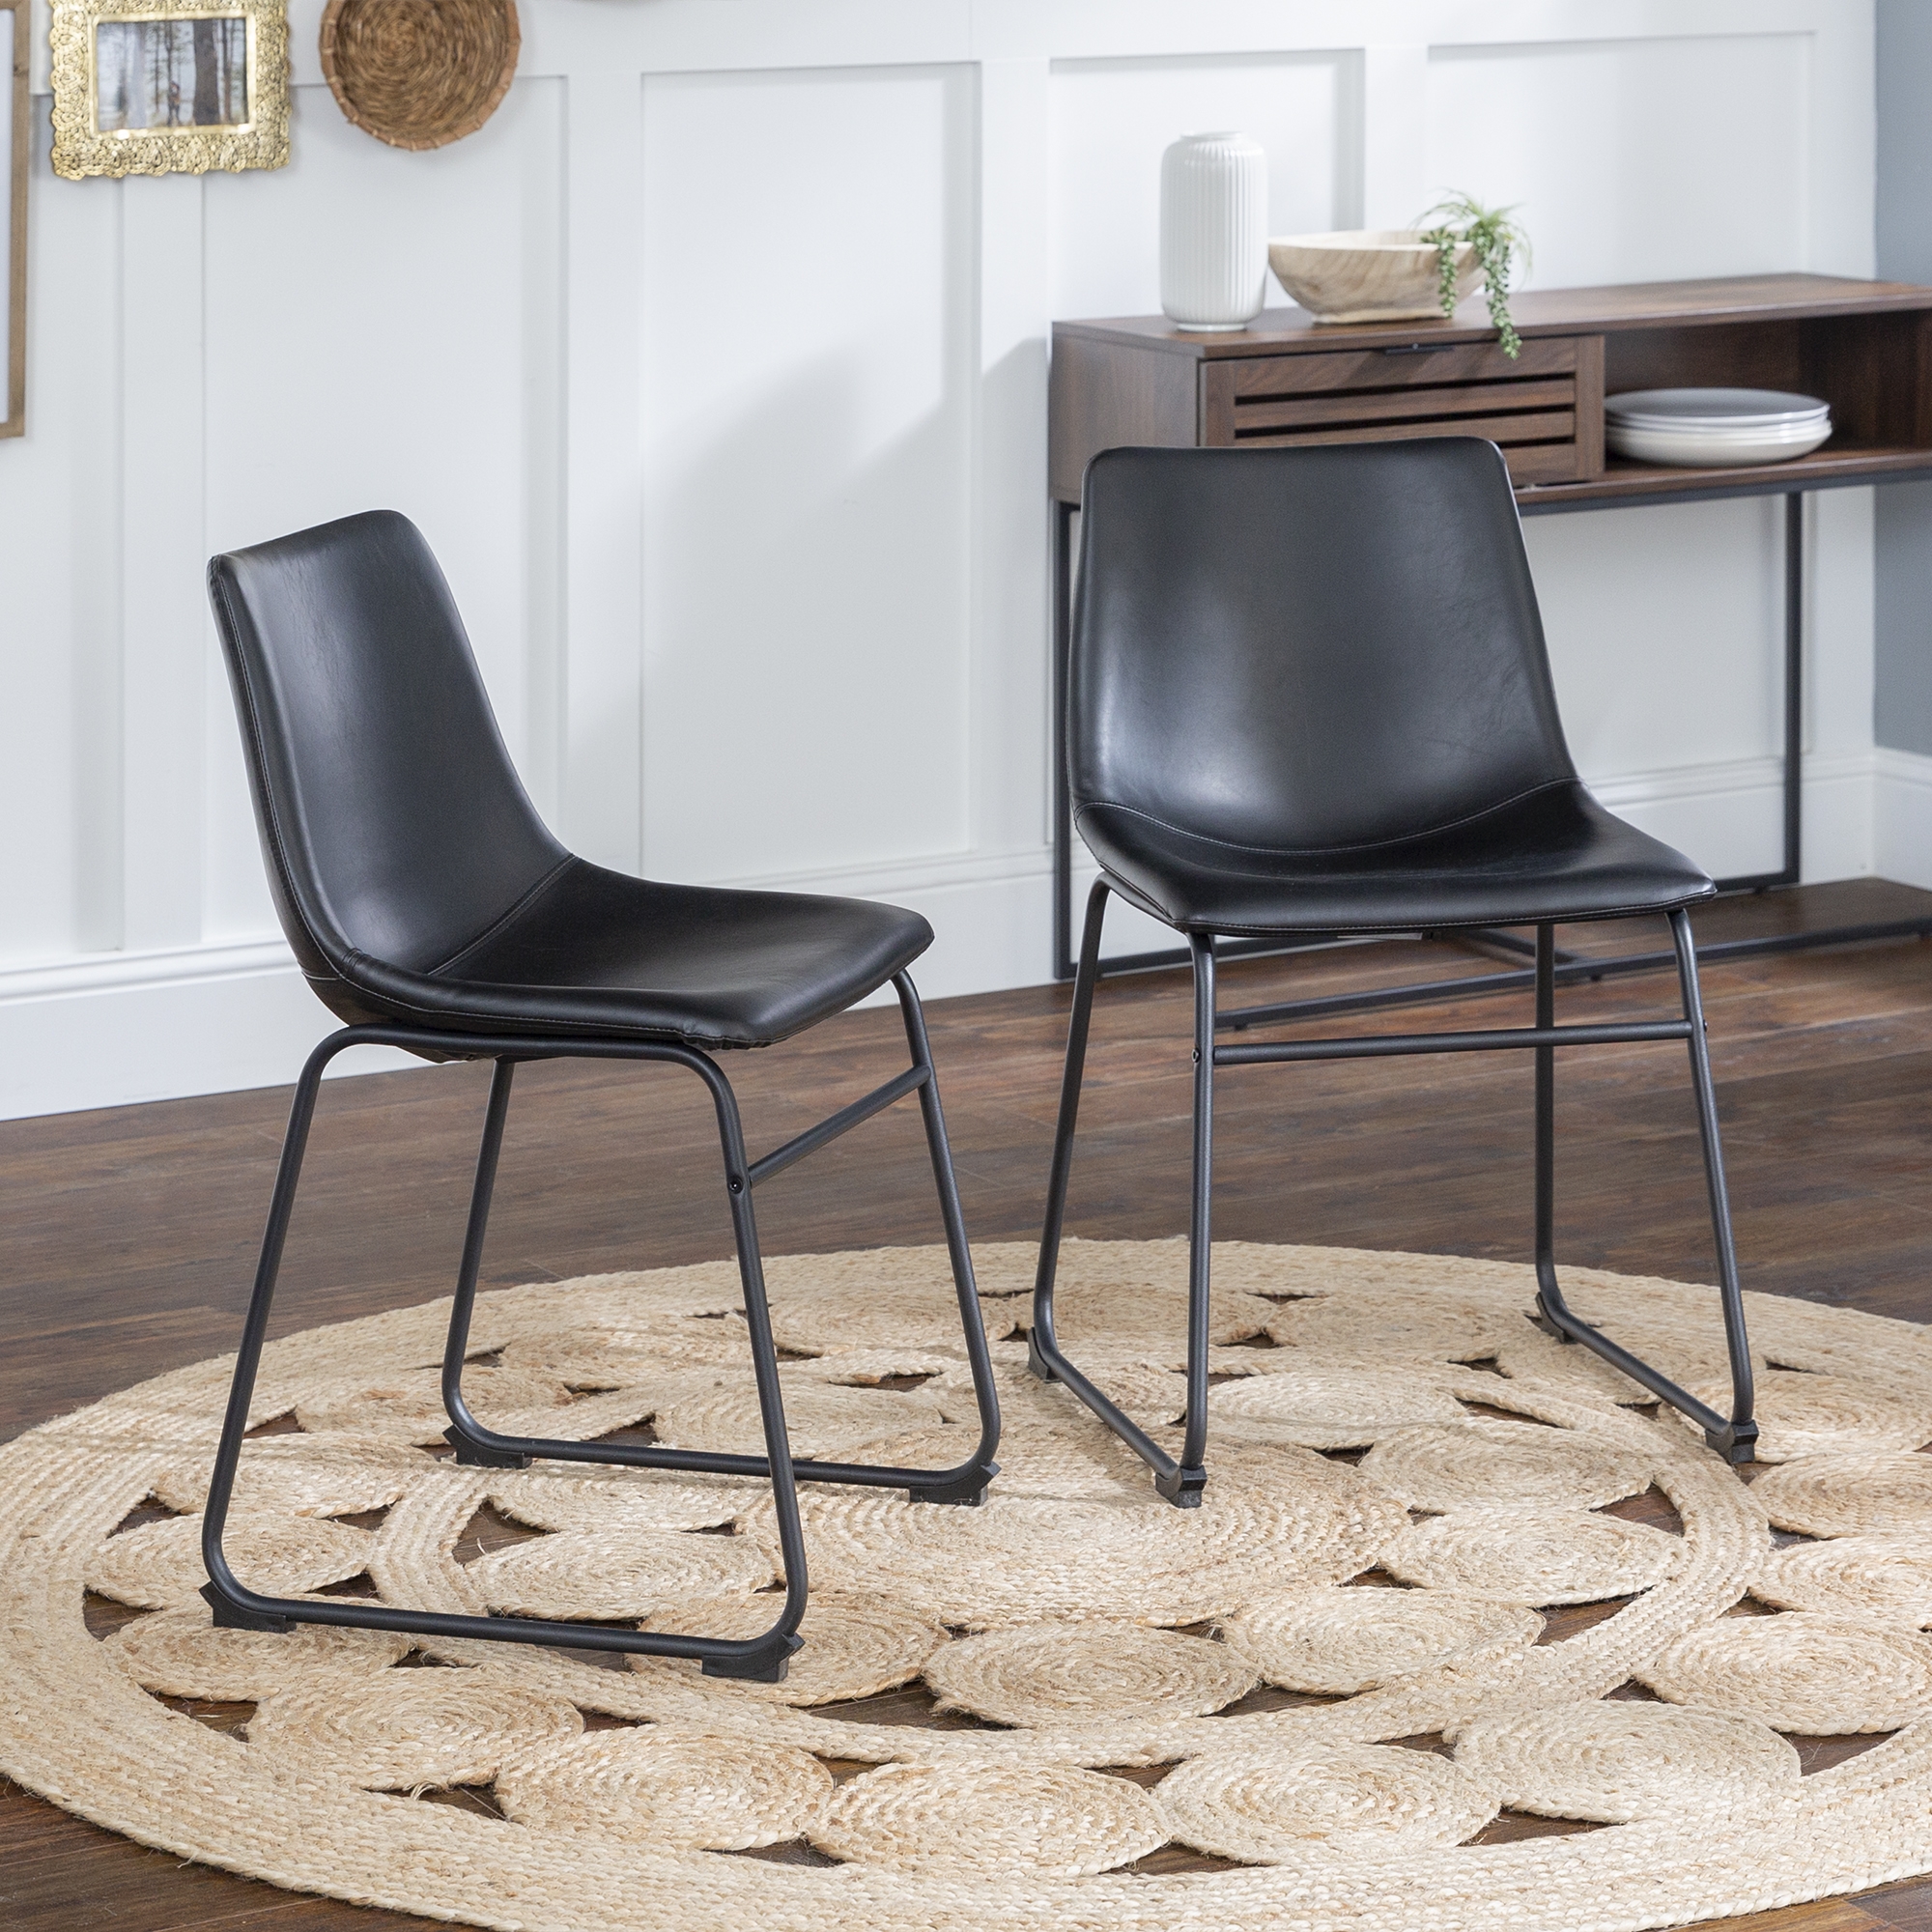 18" Industrial Faux Leather Dining Chair, Set of 2 - Black - Image 4